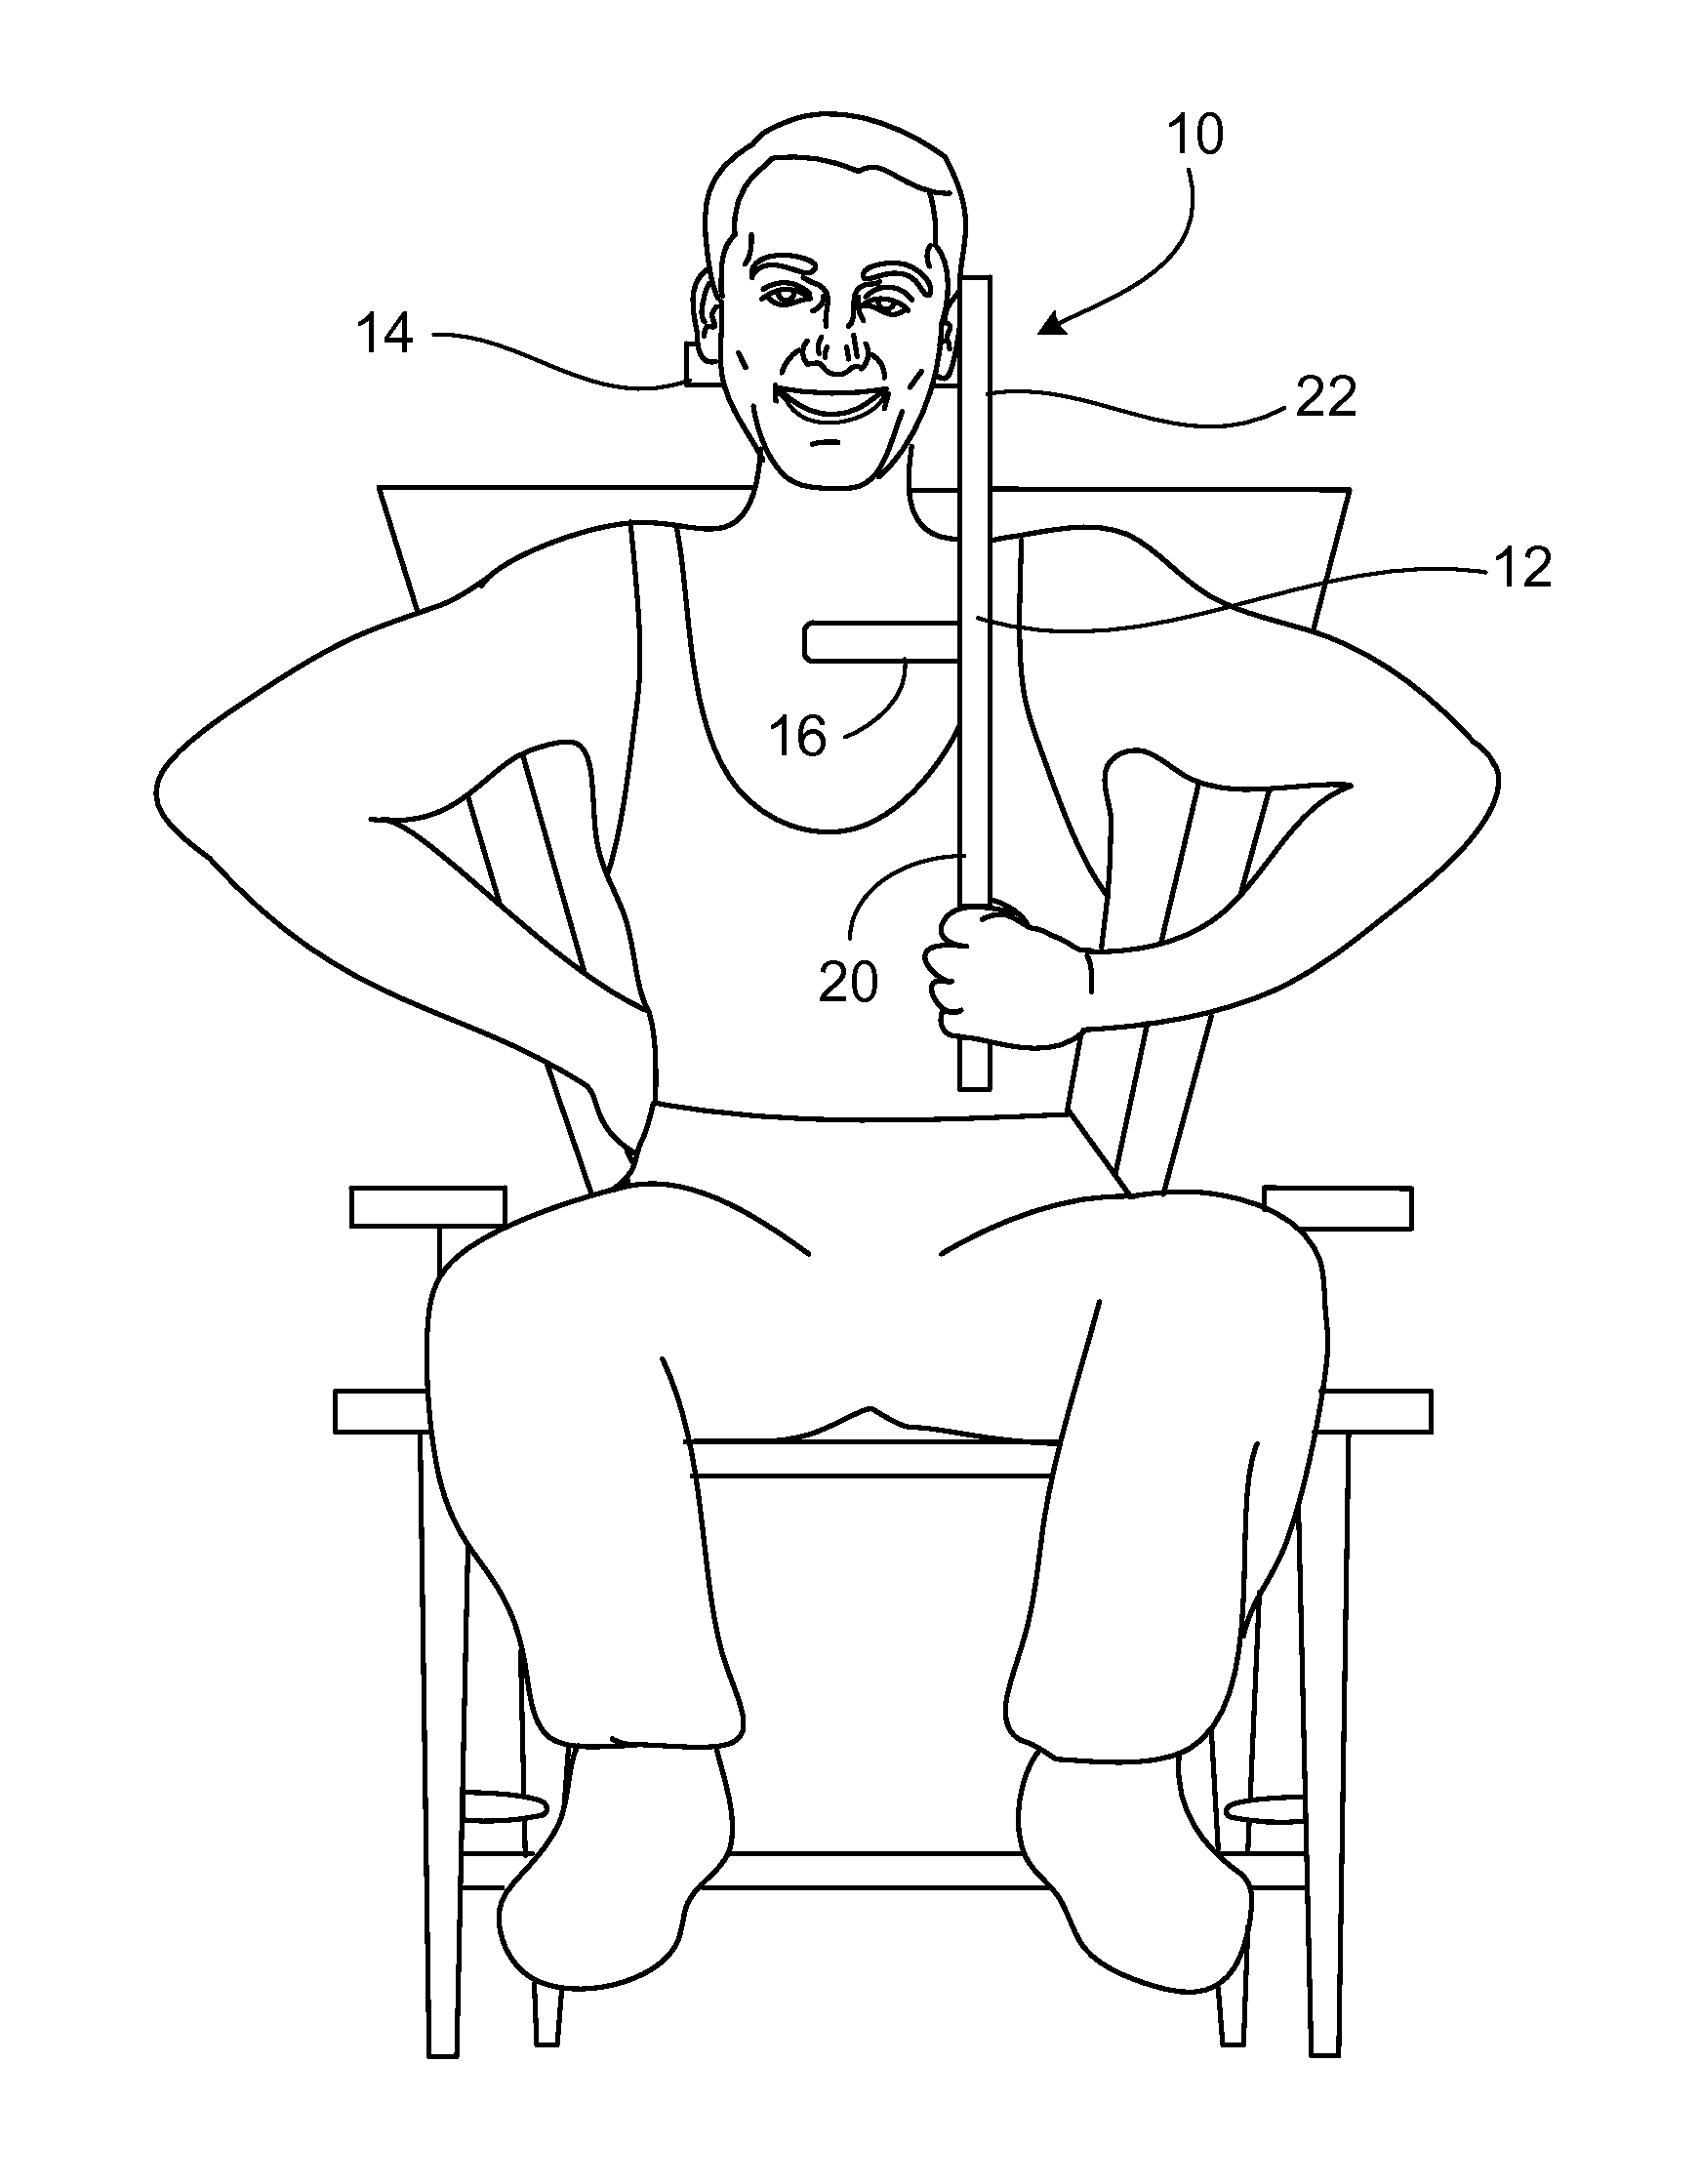 Neck pain relieving devices